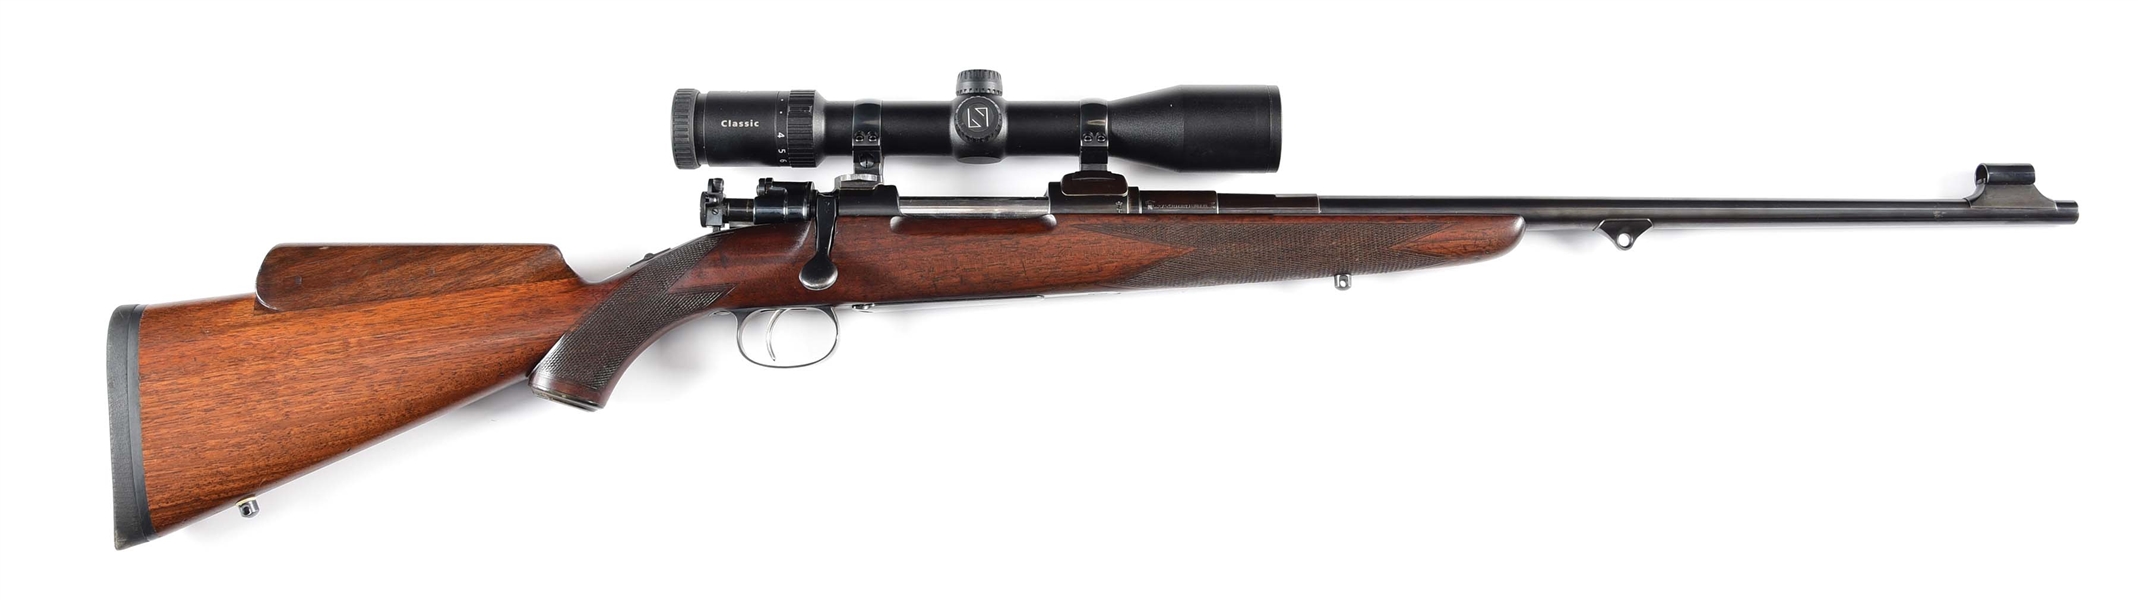 (C) ATTRACTIVE RIGBY BOLT ACTION RIFLE IN .275 RIGBY WITH ZEISS DIAVARI GLASS.